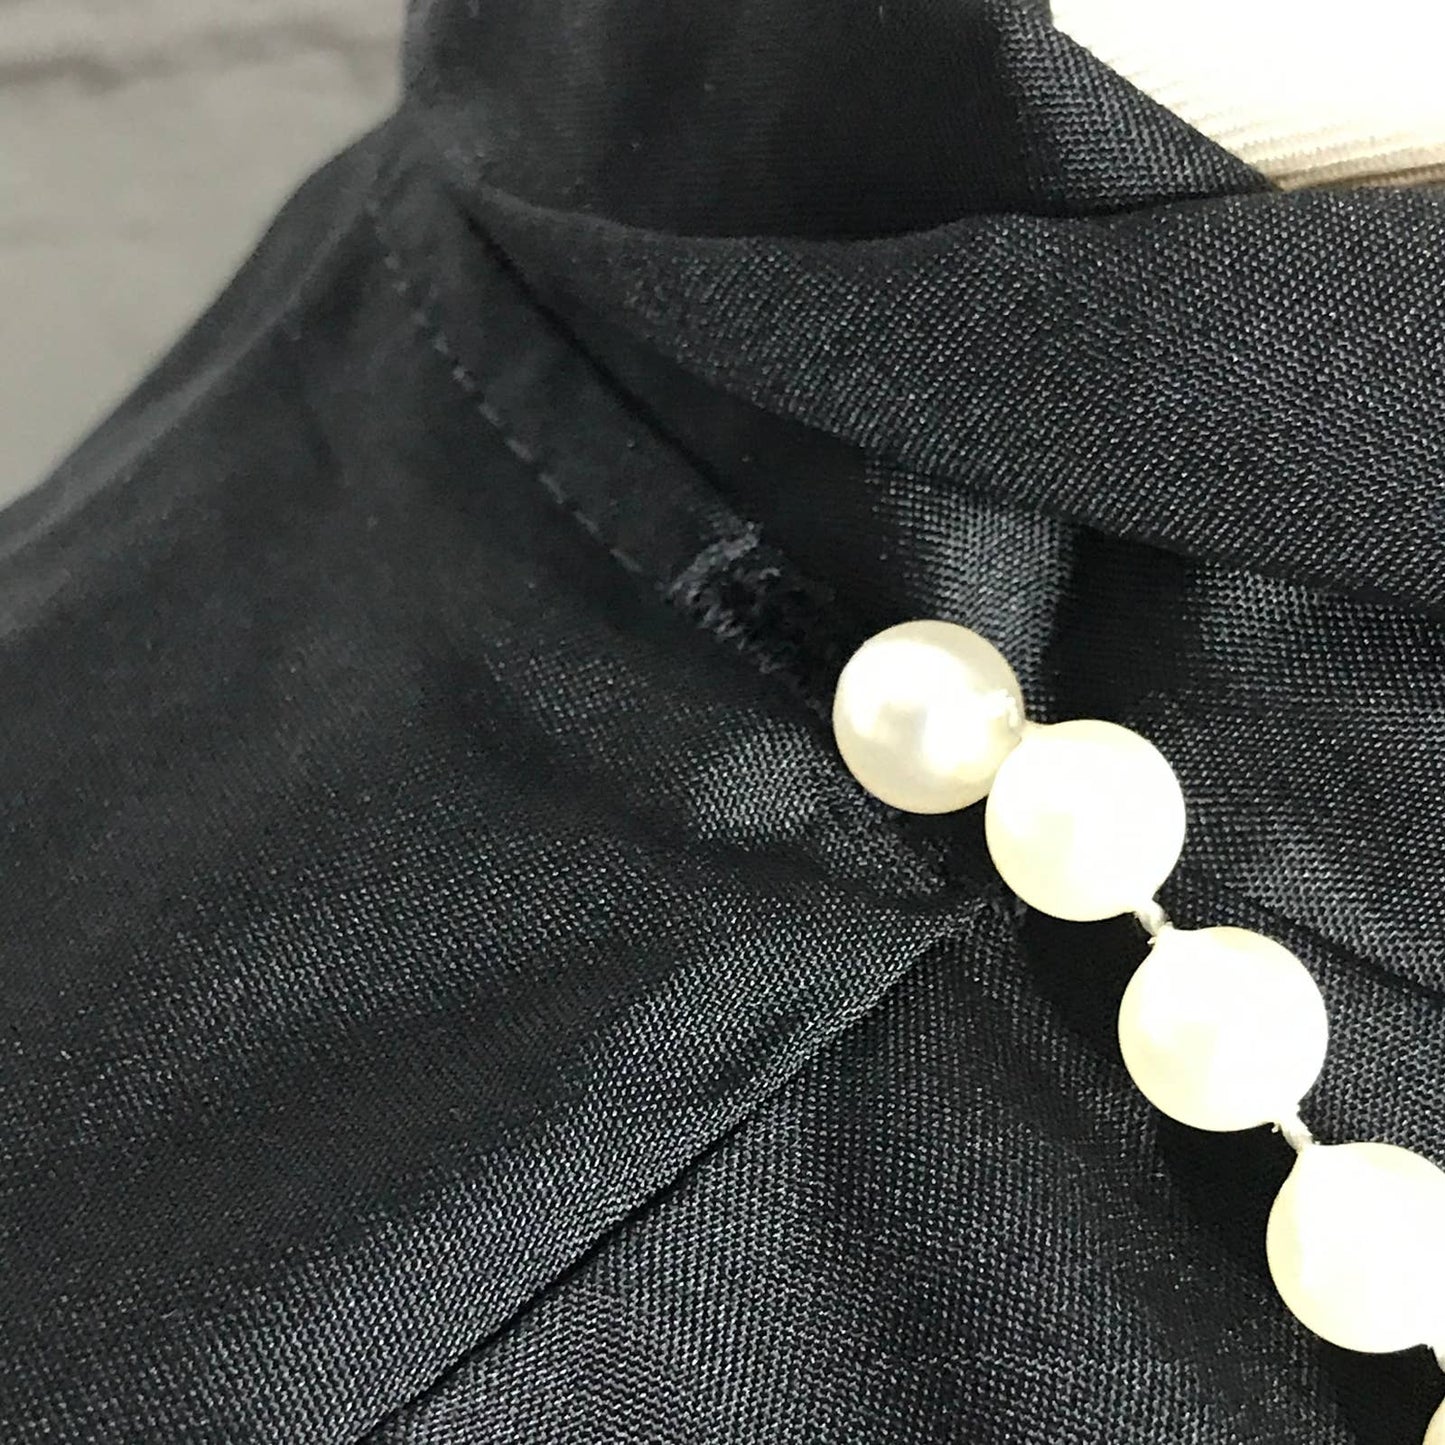 Vintage 80s Black Blouse with Attached Faux Pearl Necklace by Style Trix Size 40